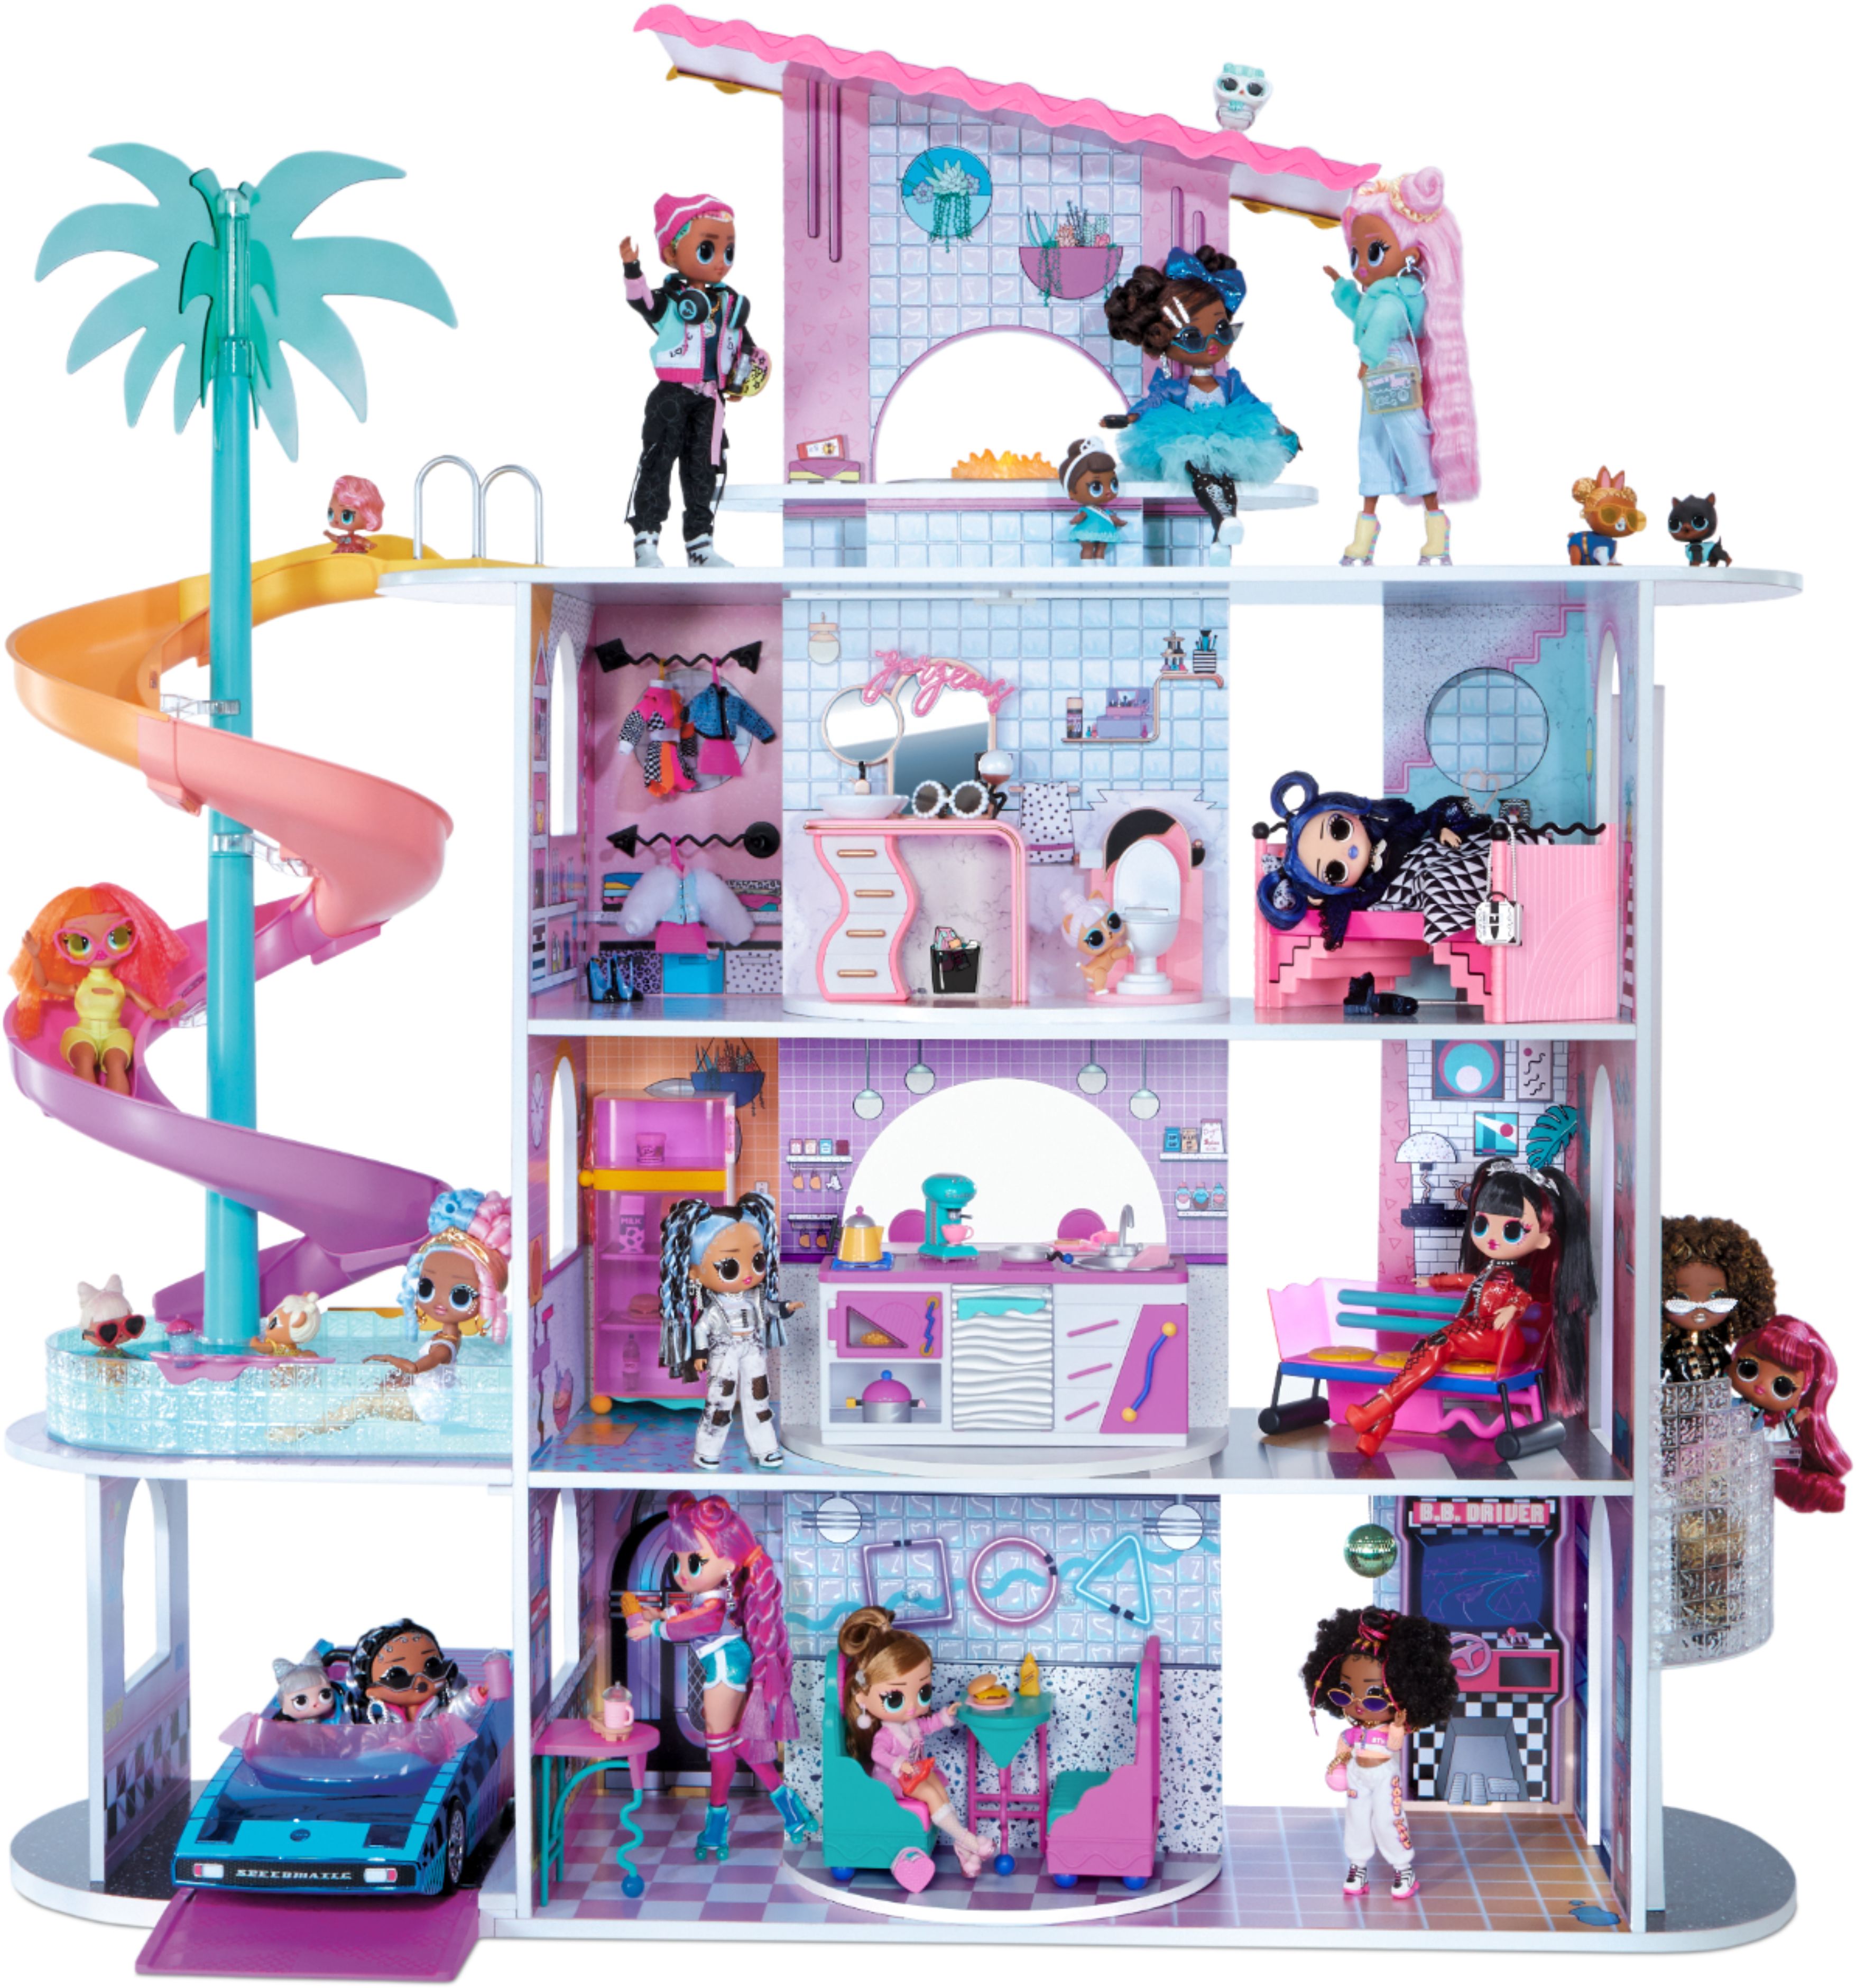 Doll Houses for Sale - Cheap Prices!